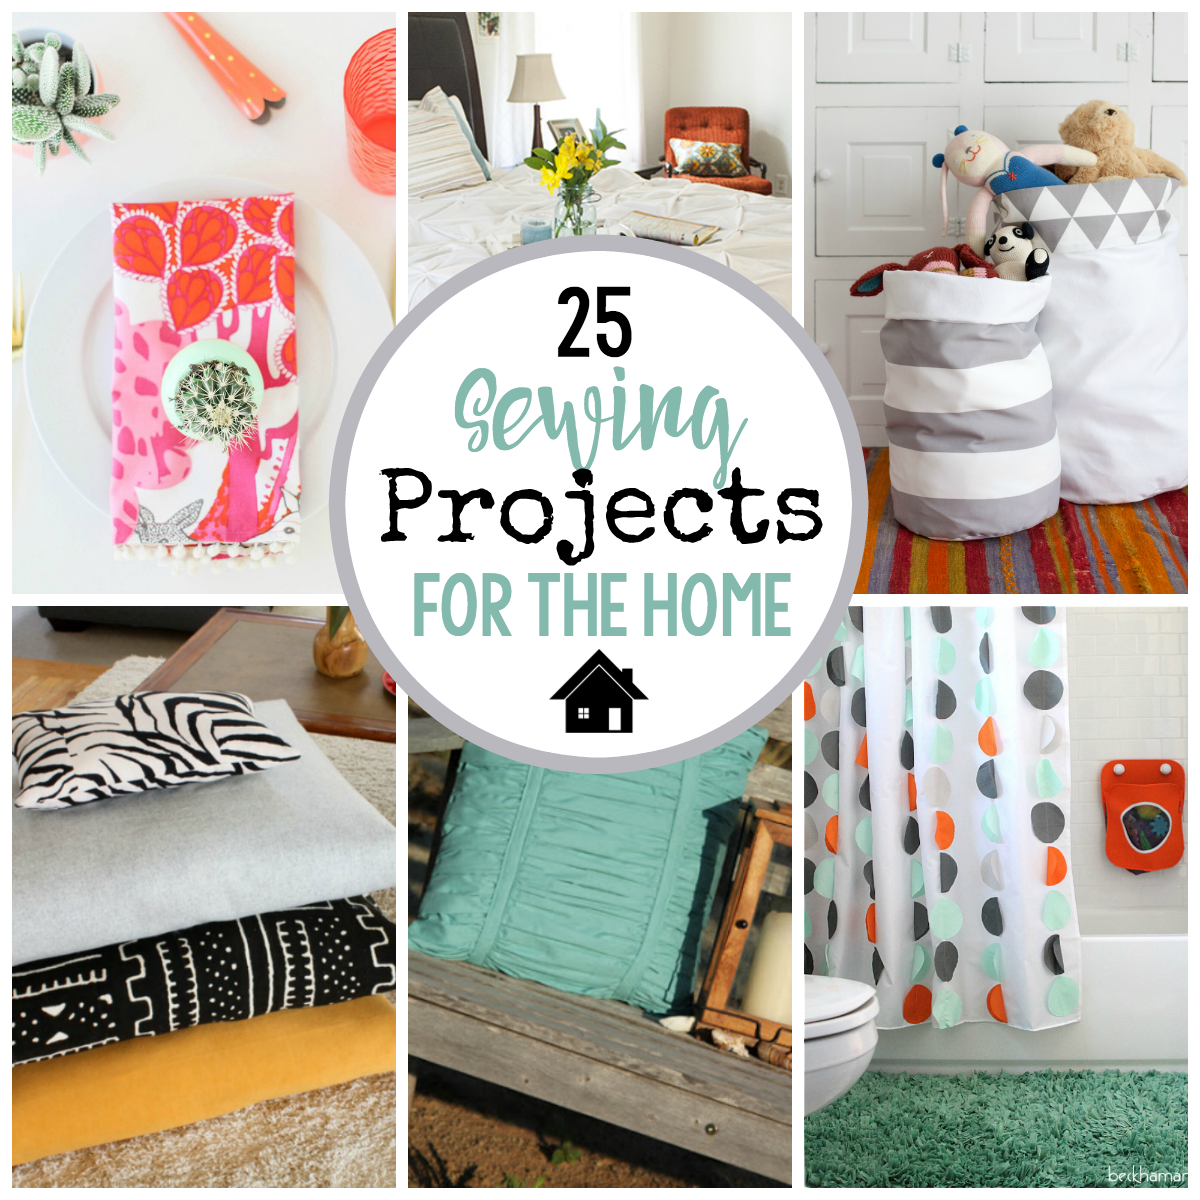 25 Sewing Projects for the Home